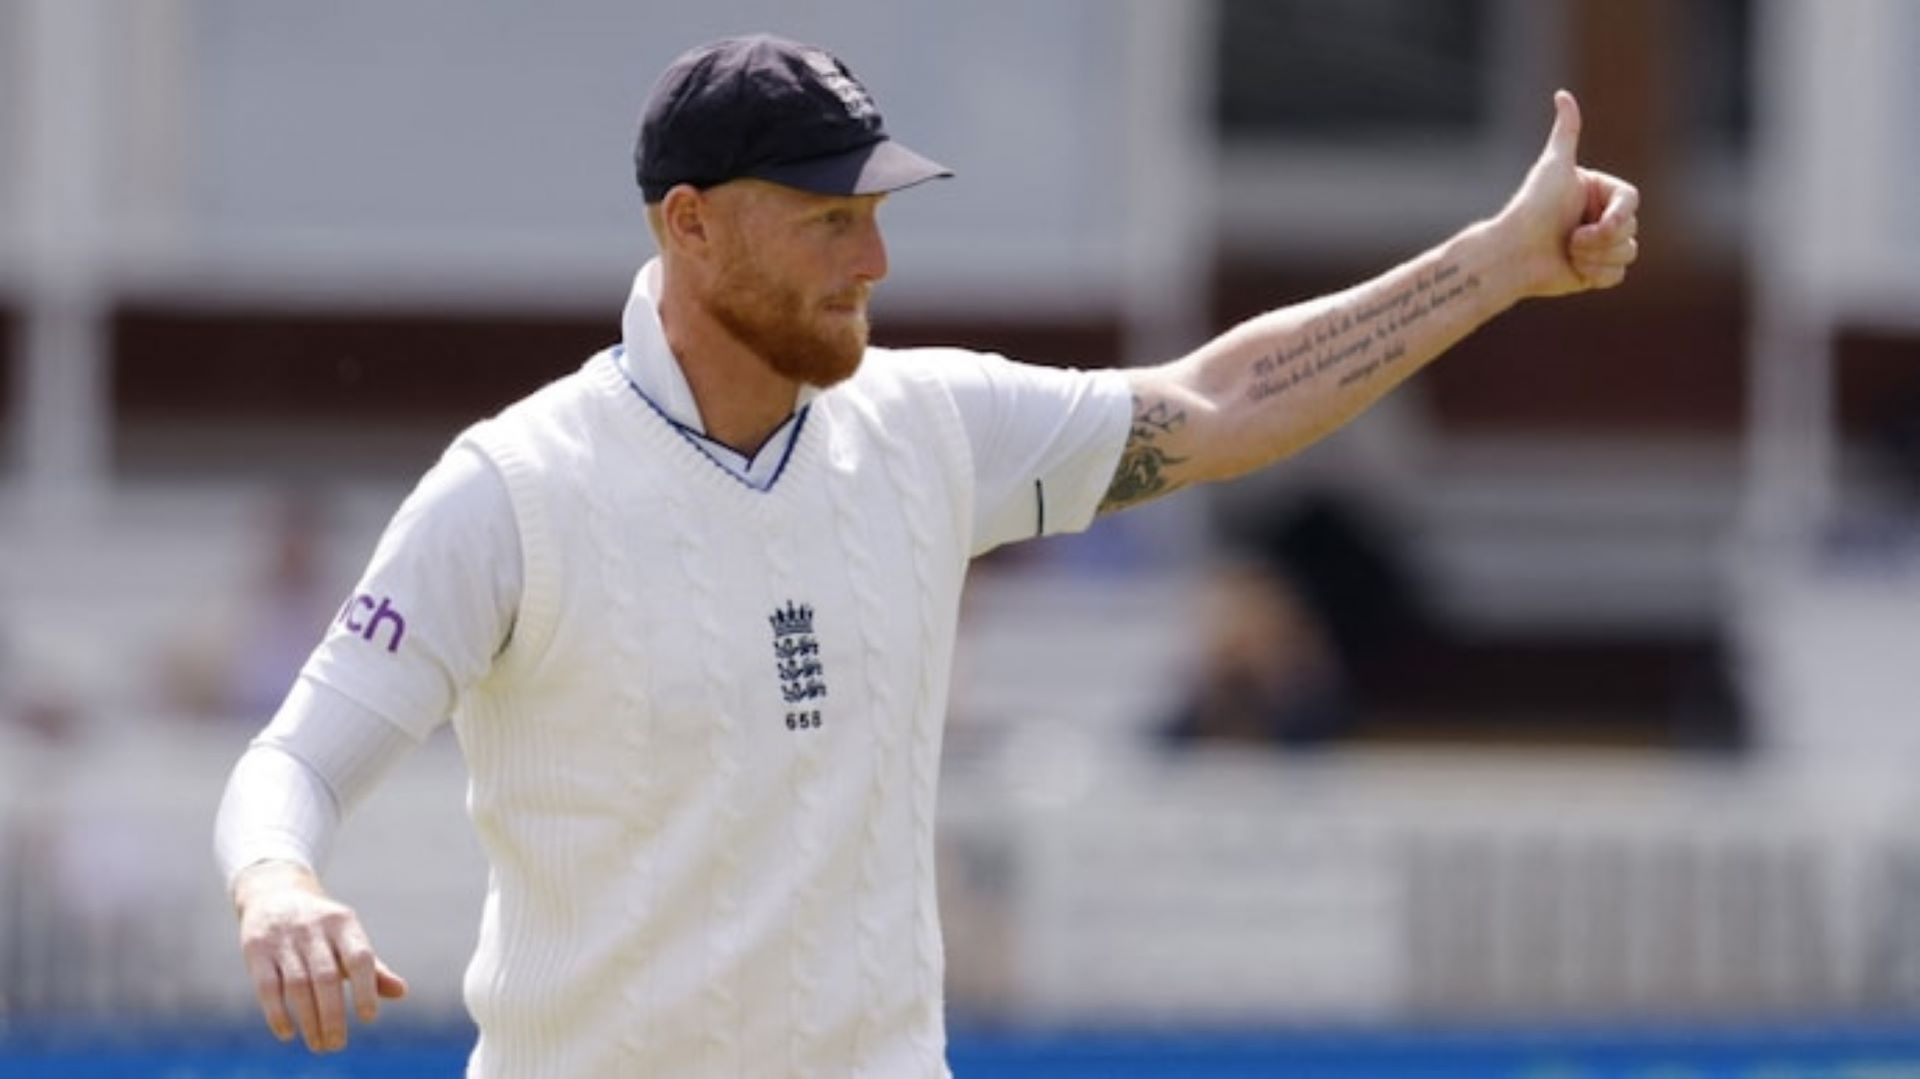 Ben Stokes has reinginted England in Test cricket since becoming captain